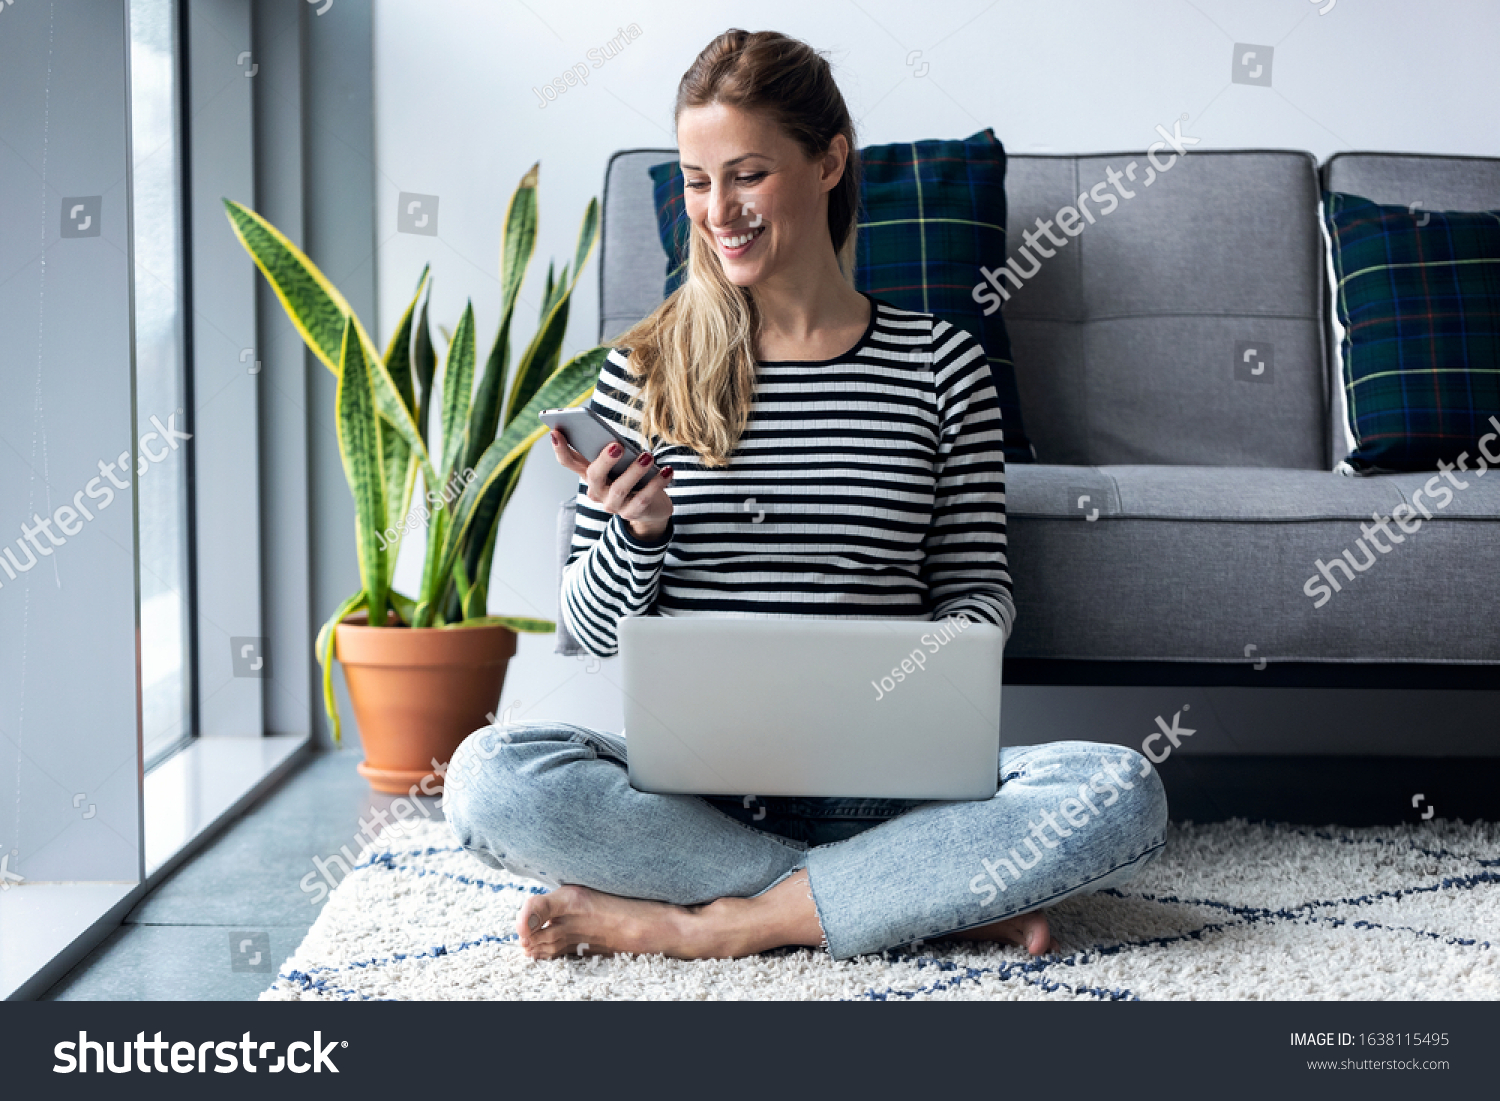 Shot of pretty young woman using her mobile phone while working with laptop sitting on the floor at home.